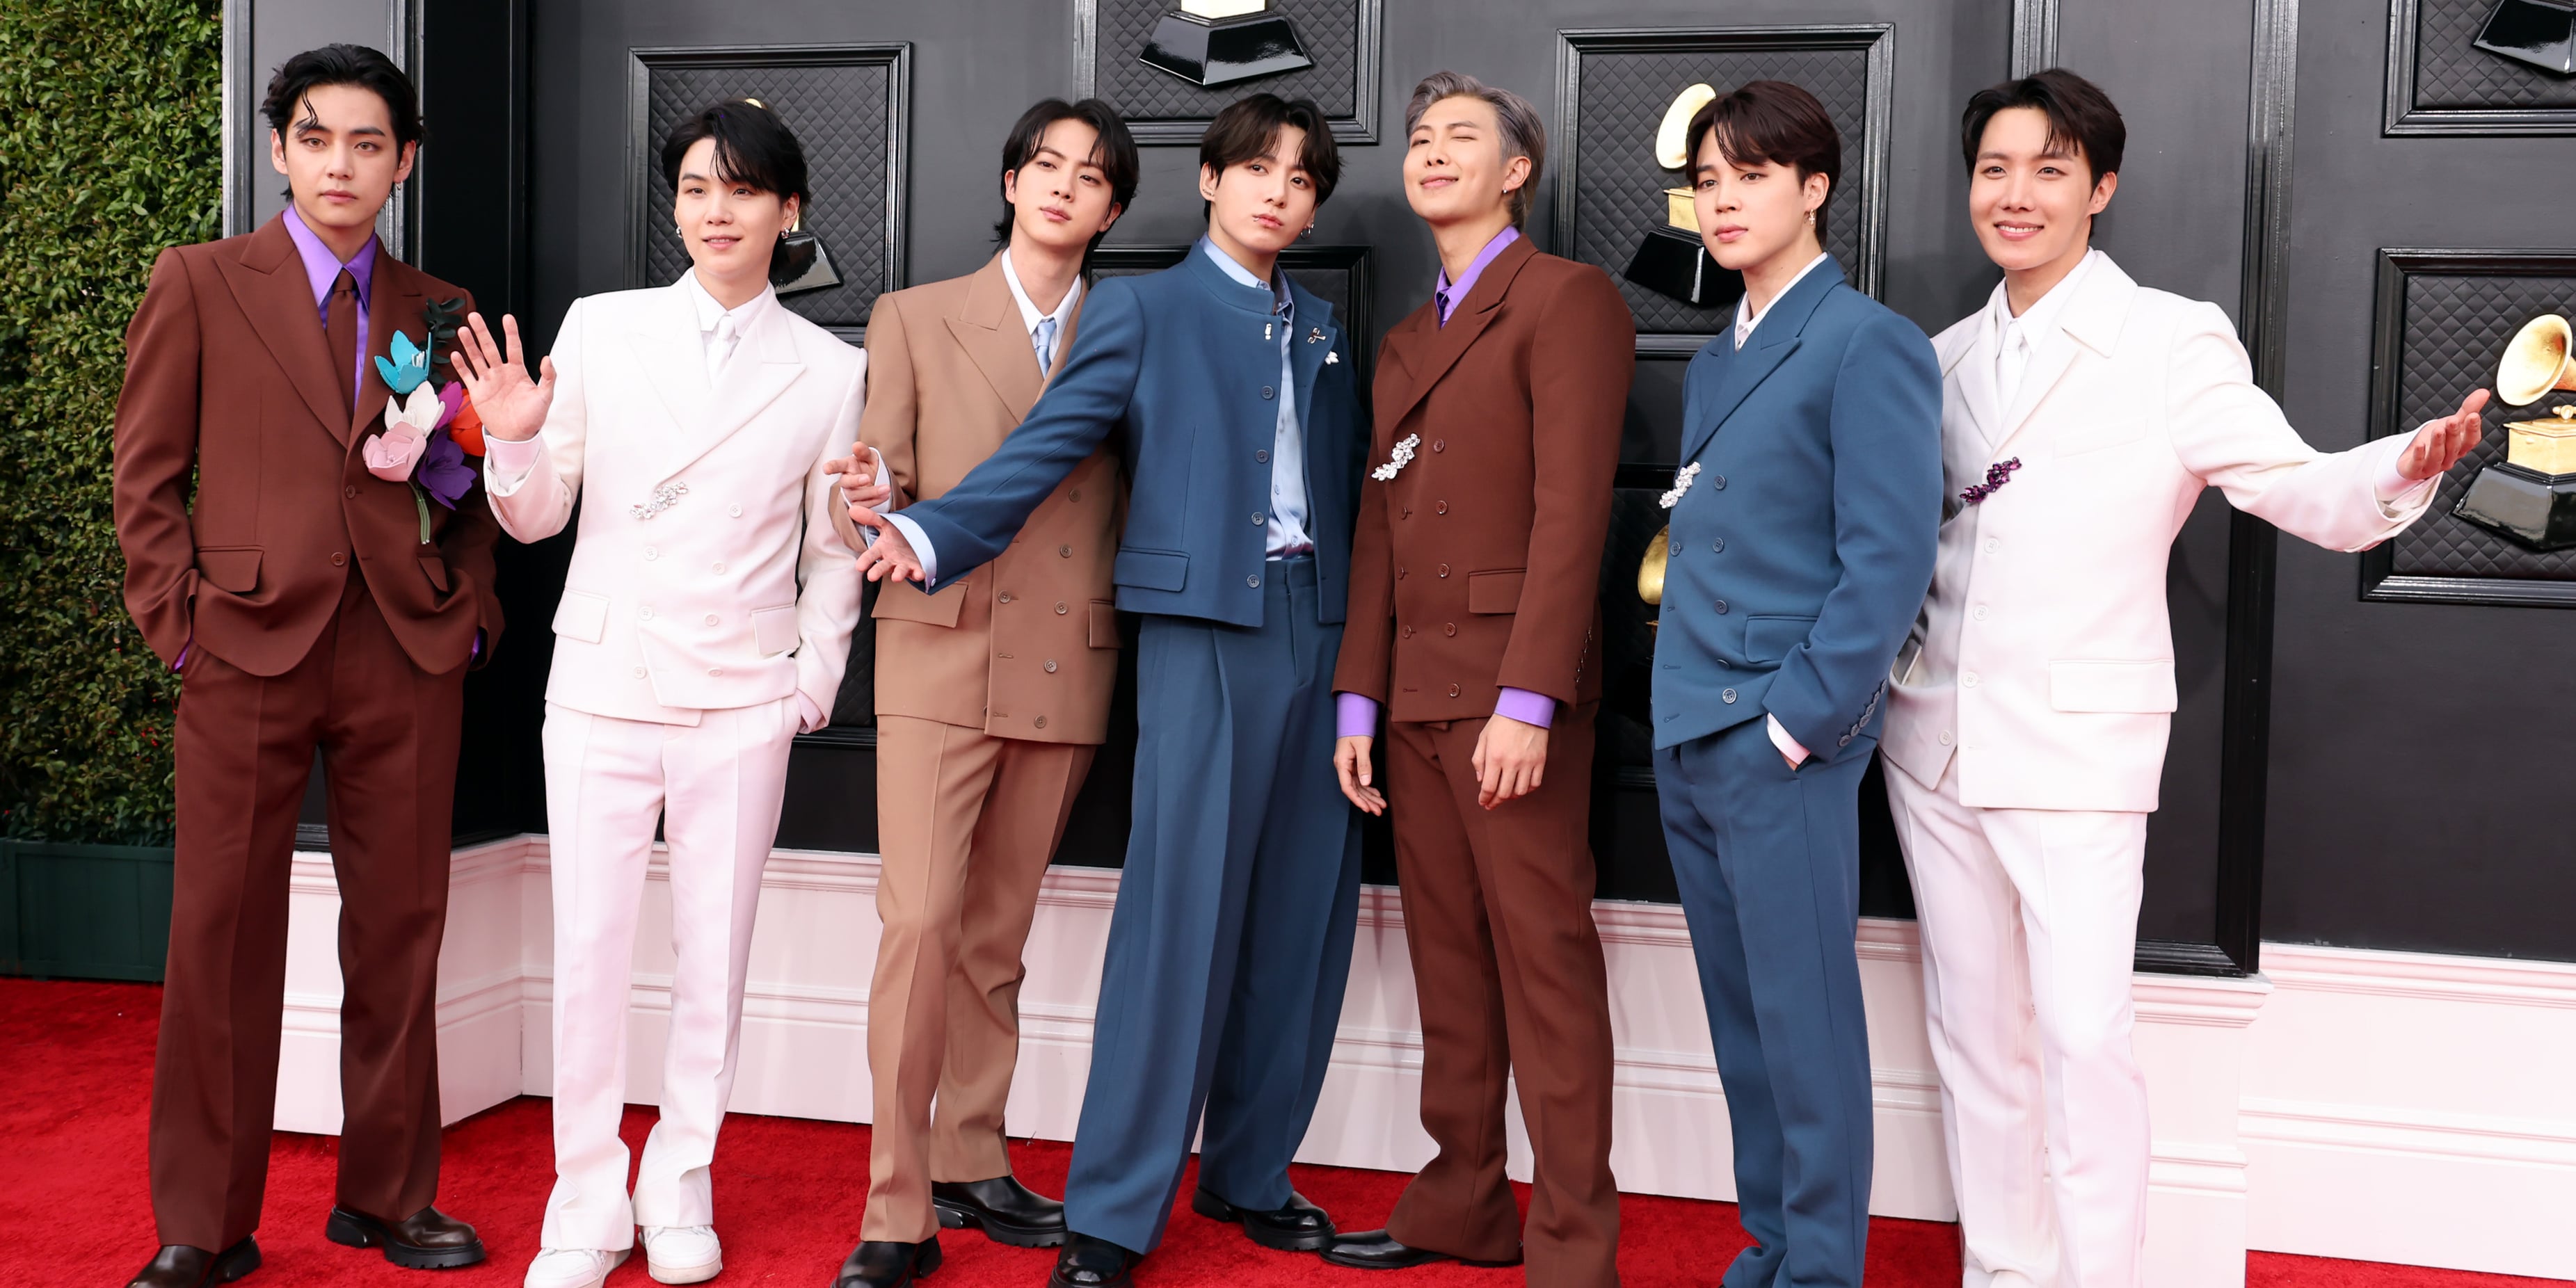 BTS fans react as group misses Grammys again: 'It is racist